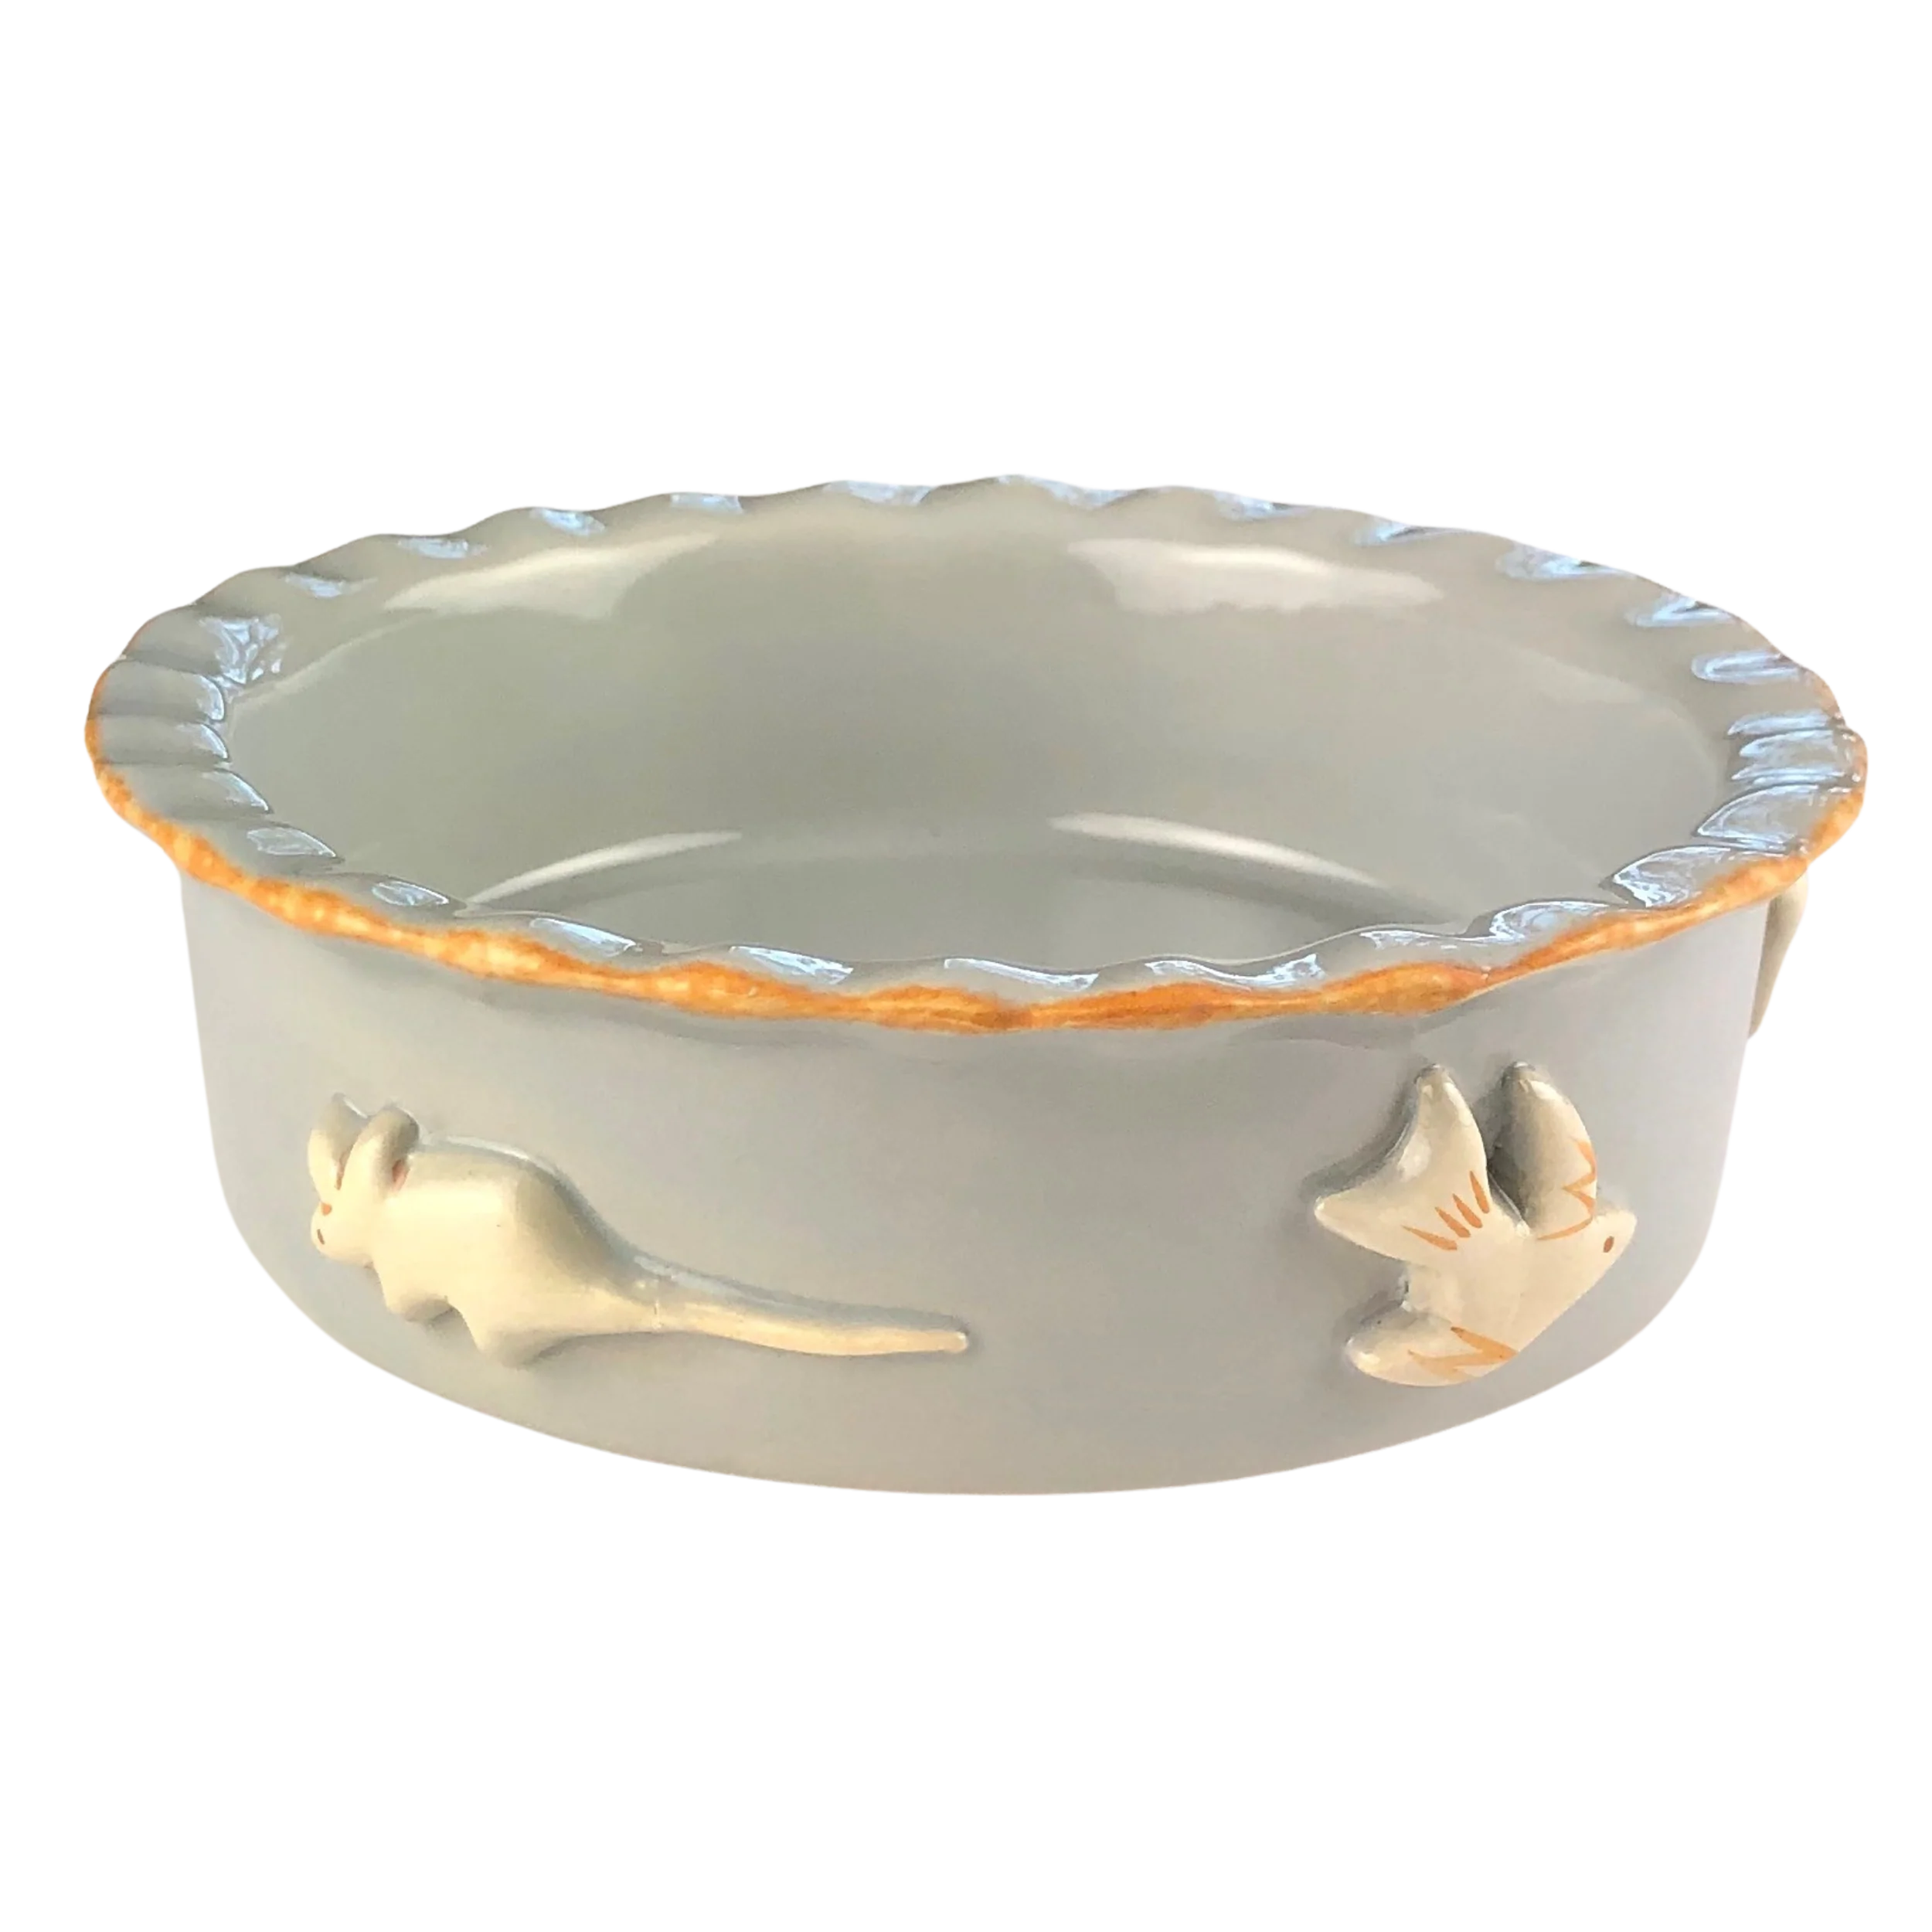 CAT-BOWL-FRENCH-GREY